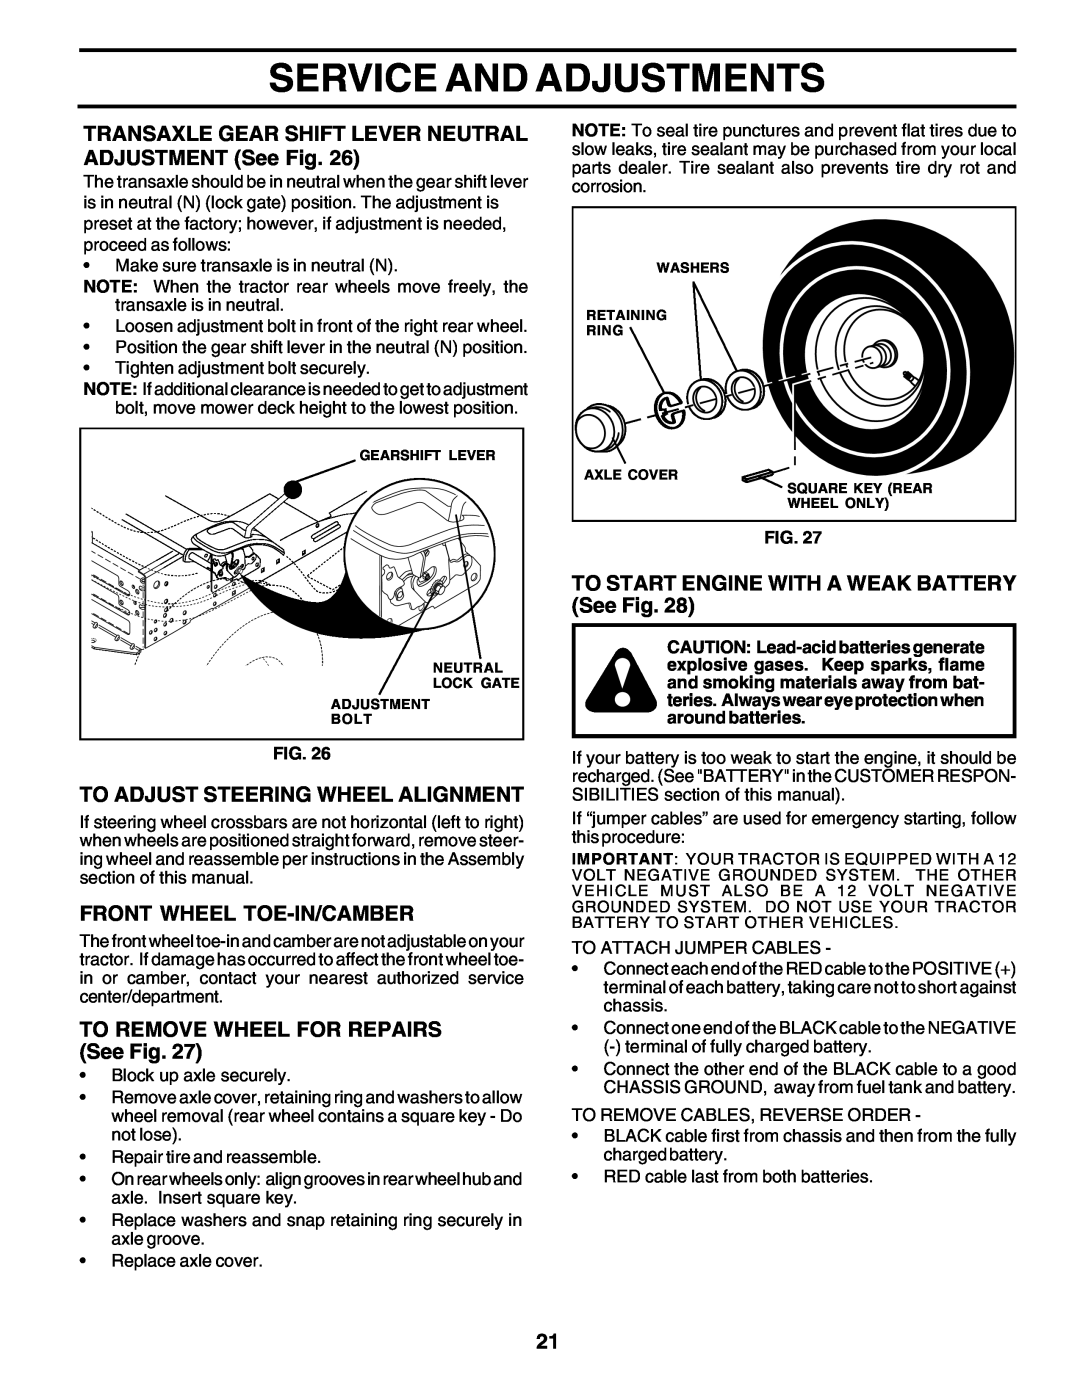 Poulan 180198 owner manual TRANSAXLE GEAR SHIFT LEVER NEUTRAL ADJUSTMENT See Fig, To Adjust Steering Wheel Alignment 